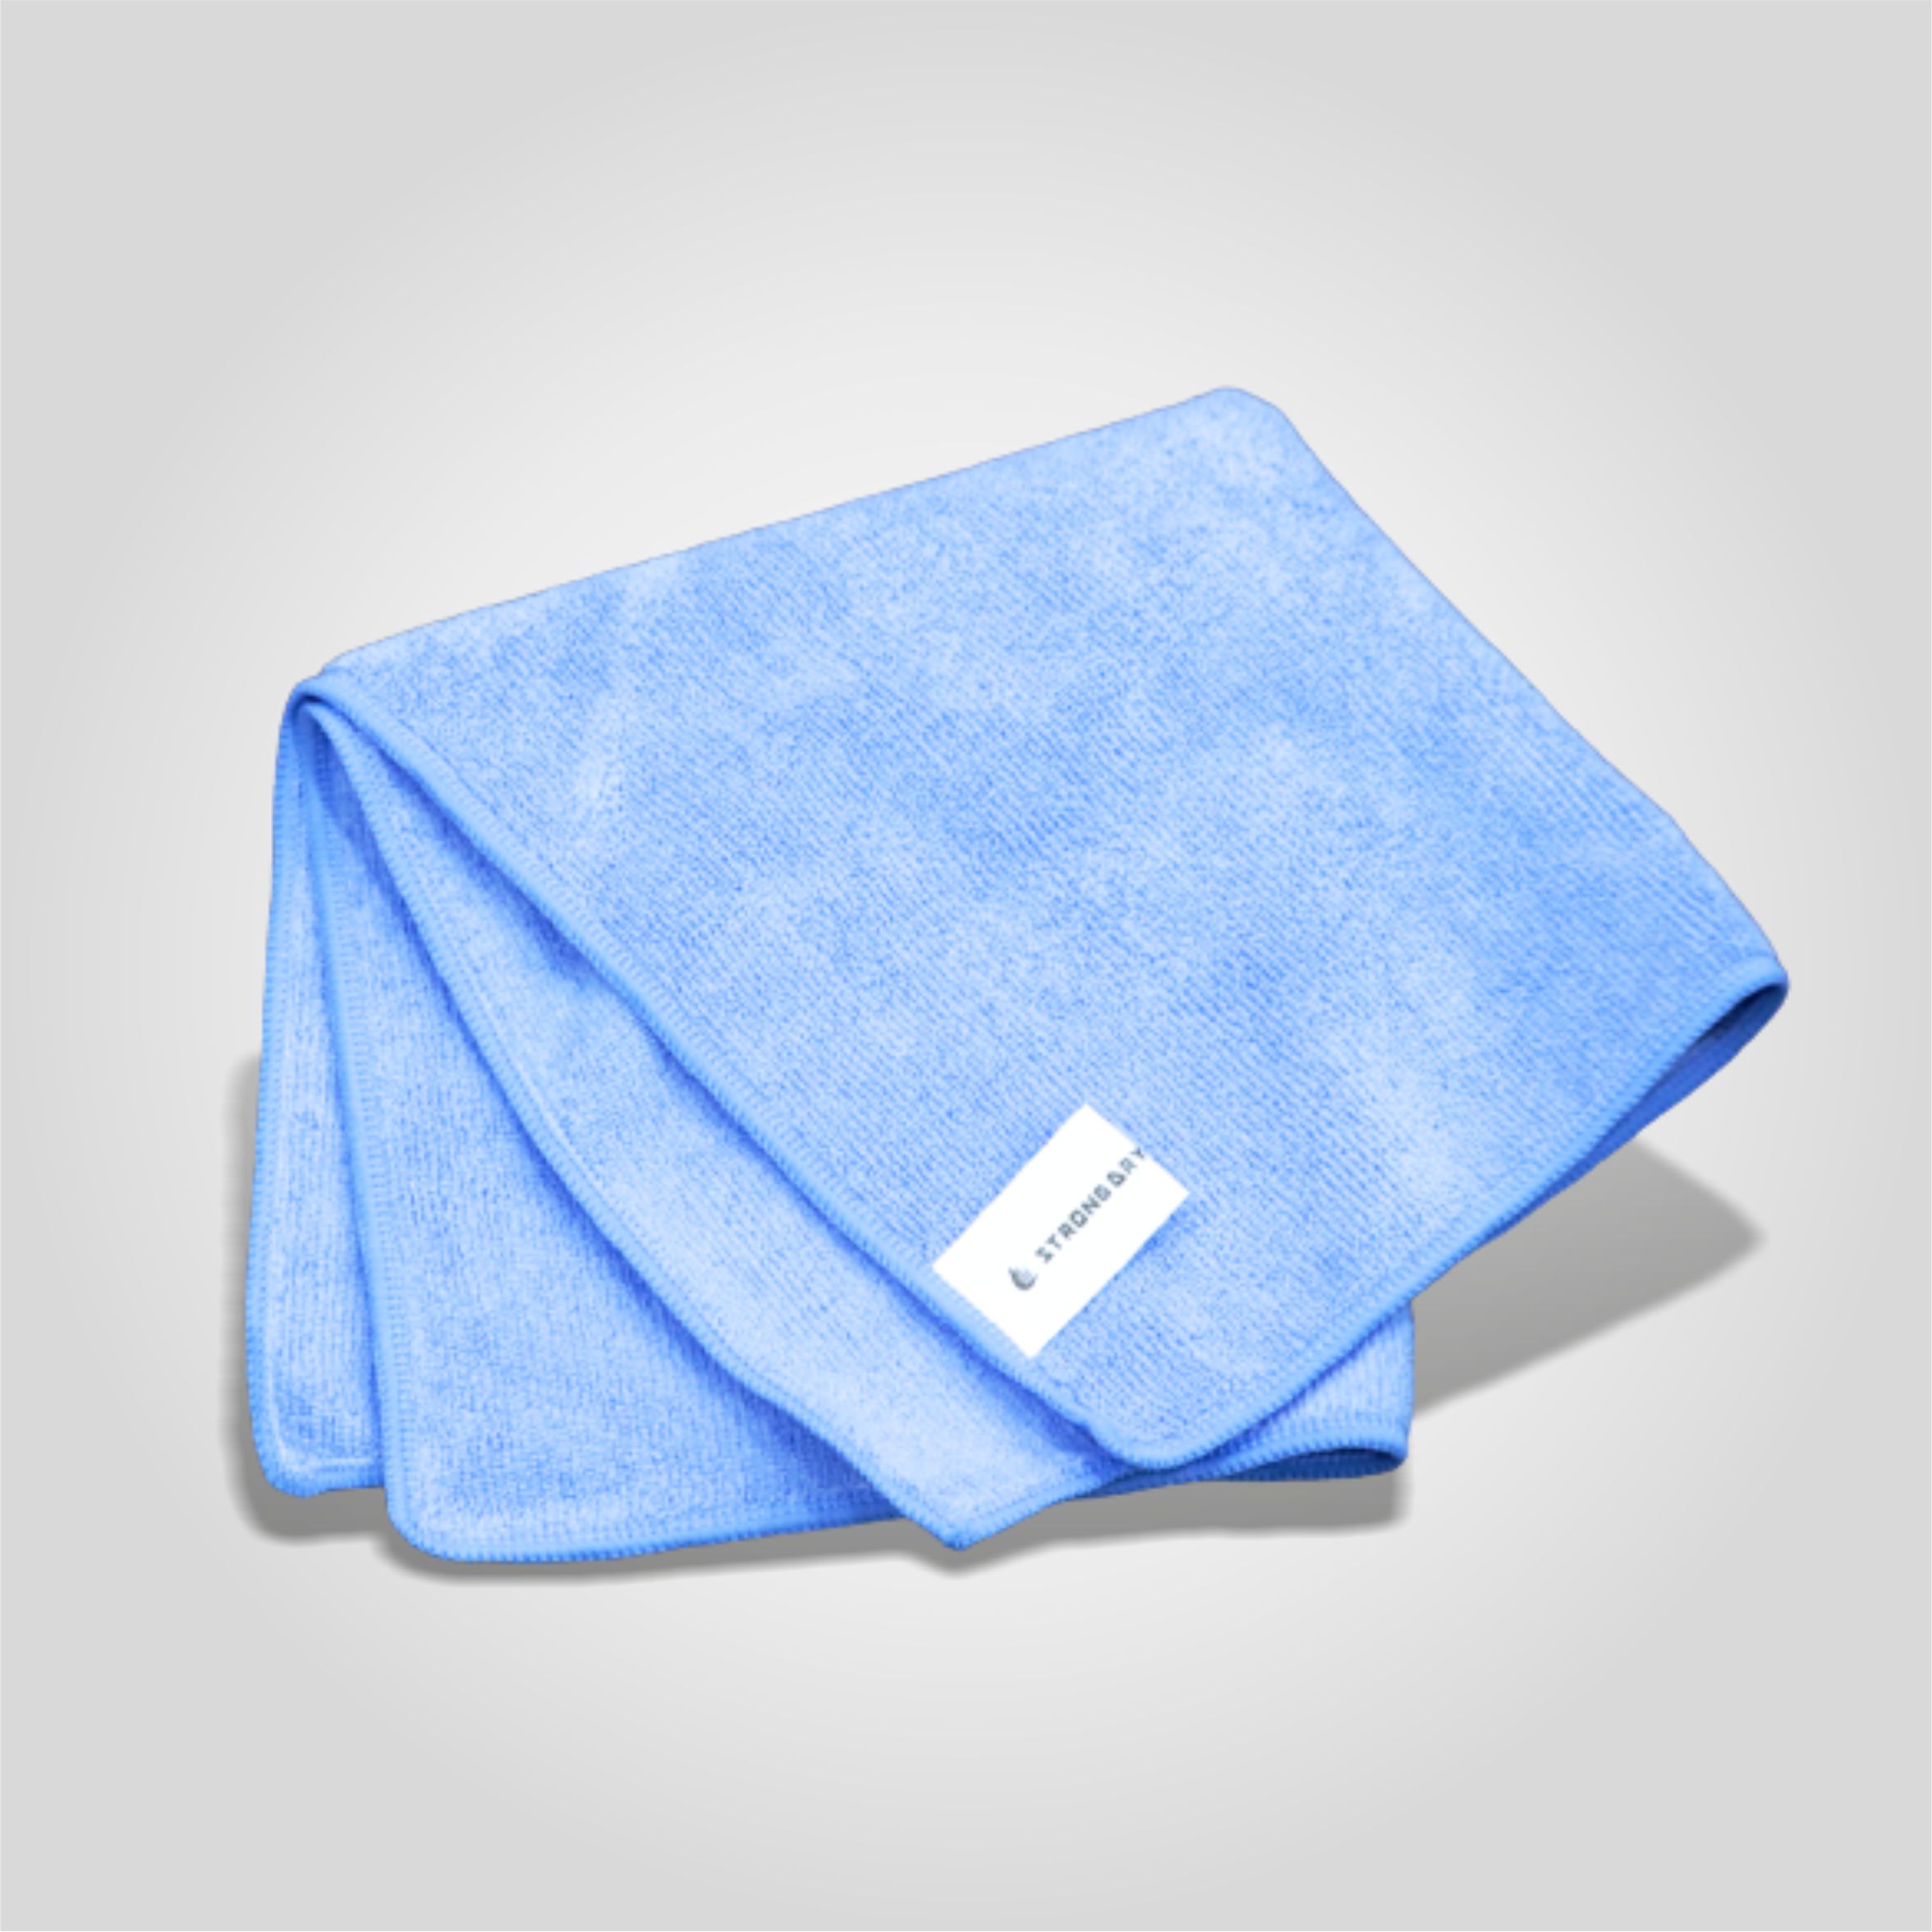 MICROFIBER WRAP TOWEL FOR CAR CLEANING 400 GSM (SKY BLUE)